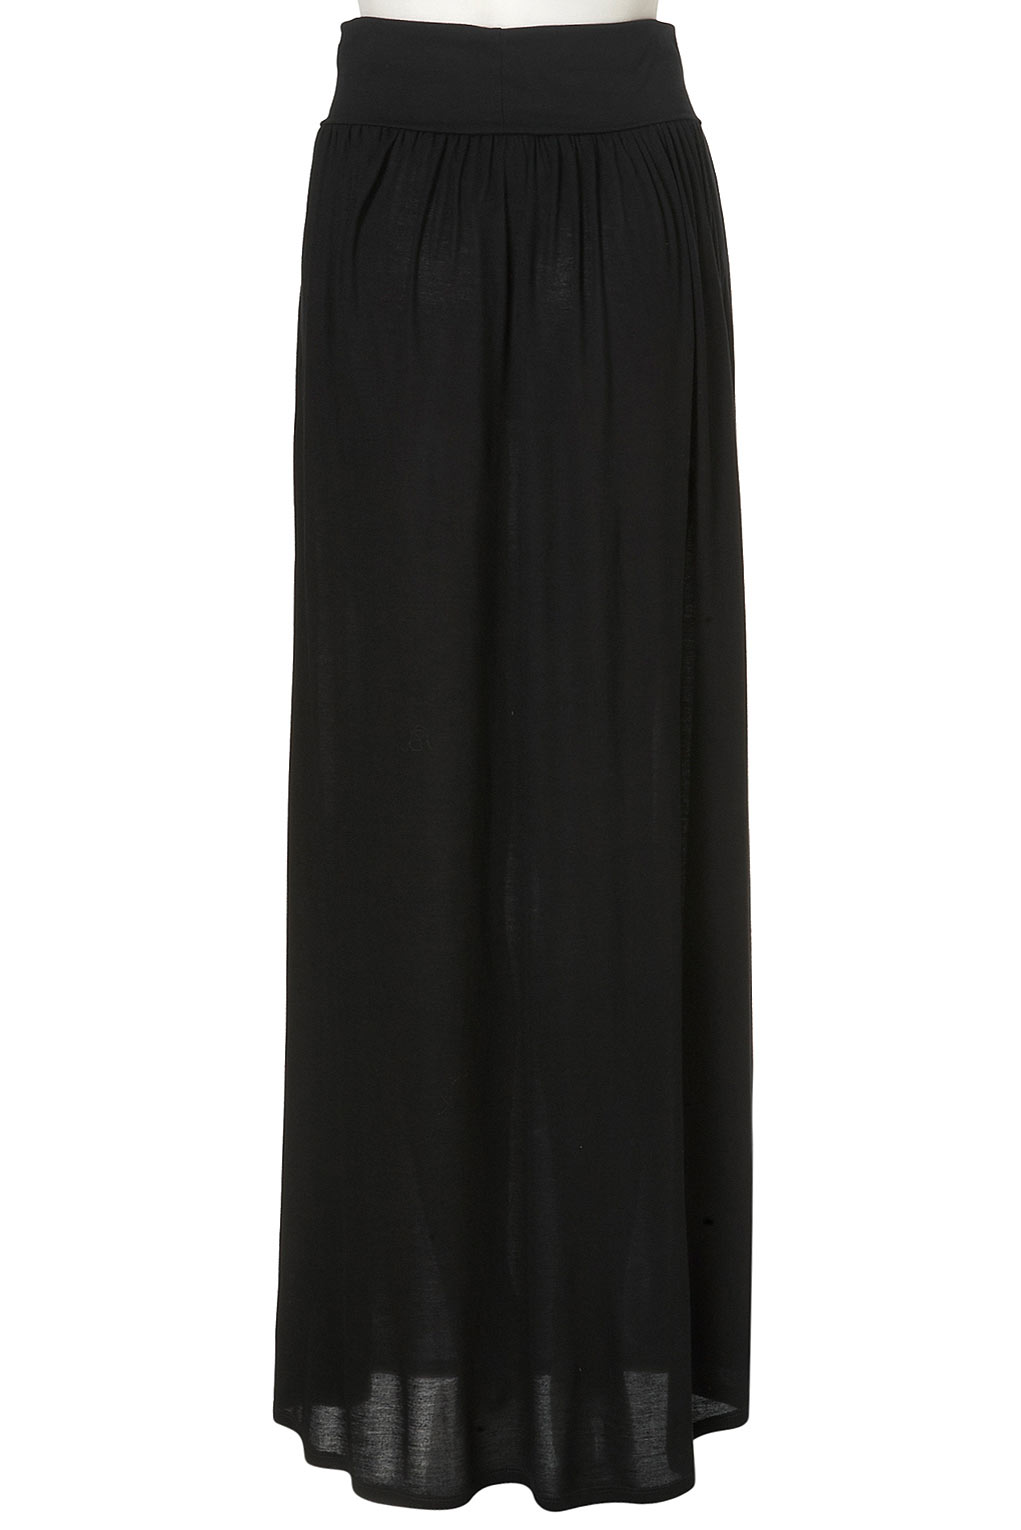 Topshop Fold Over Waistband Maxi Skirt in Black | Lyst